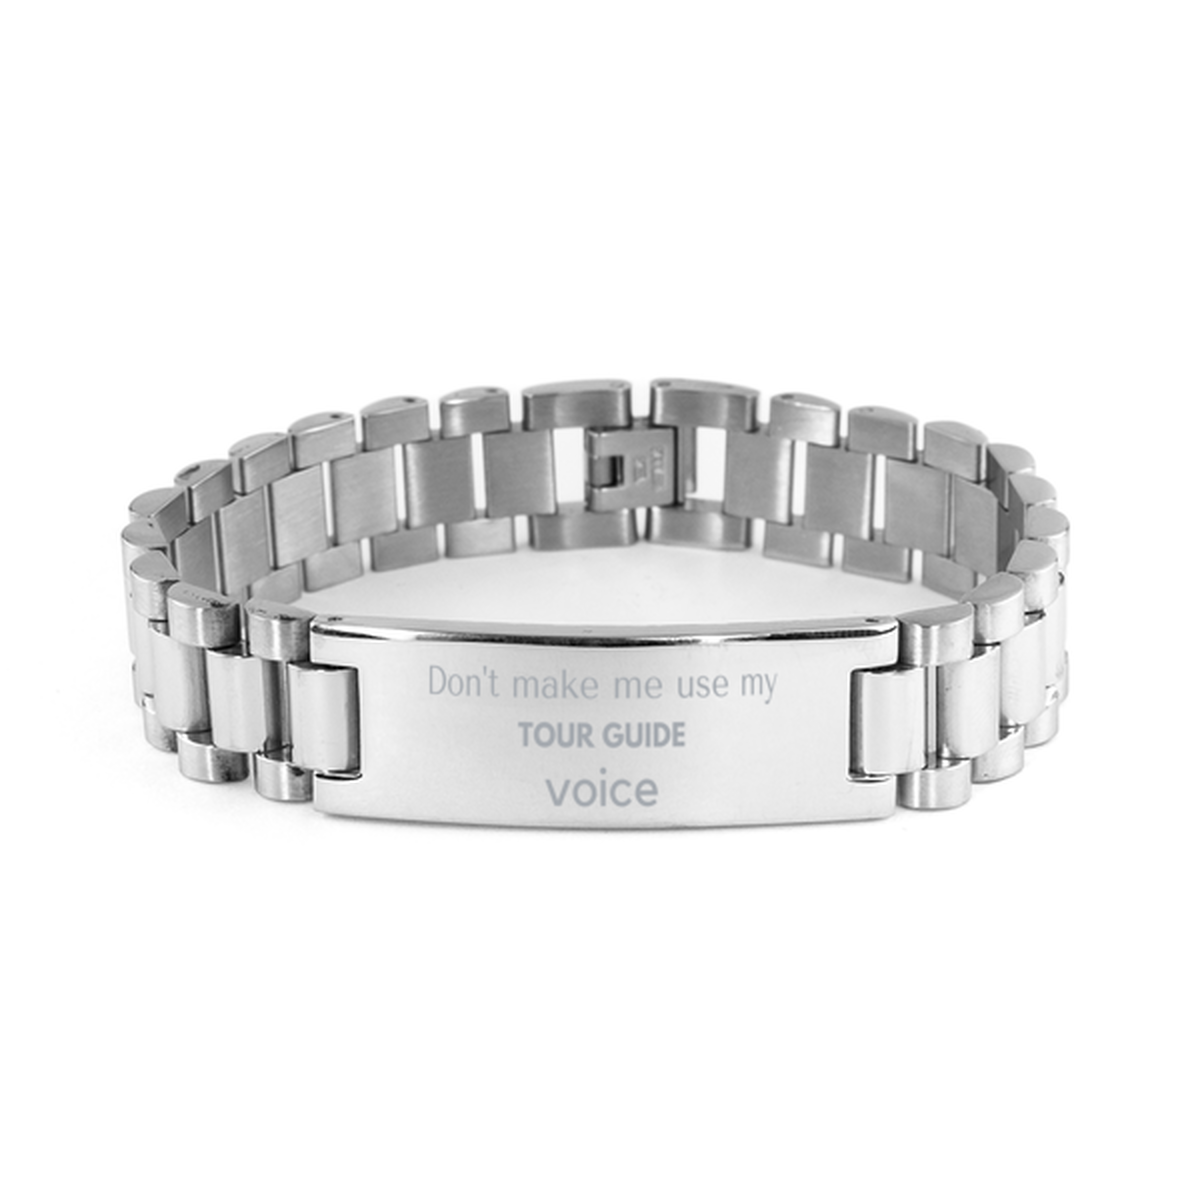 Don't make me use my Tour Guide voice, Sarcasm Tour Guide Gifts, Christmas Tour Guide Ladder Stainless Steel Bracelet Birthday Unique Gifts For Tour Guide Coworkers, Men, Women, Colleague, Friends